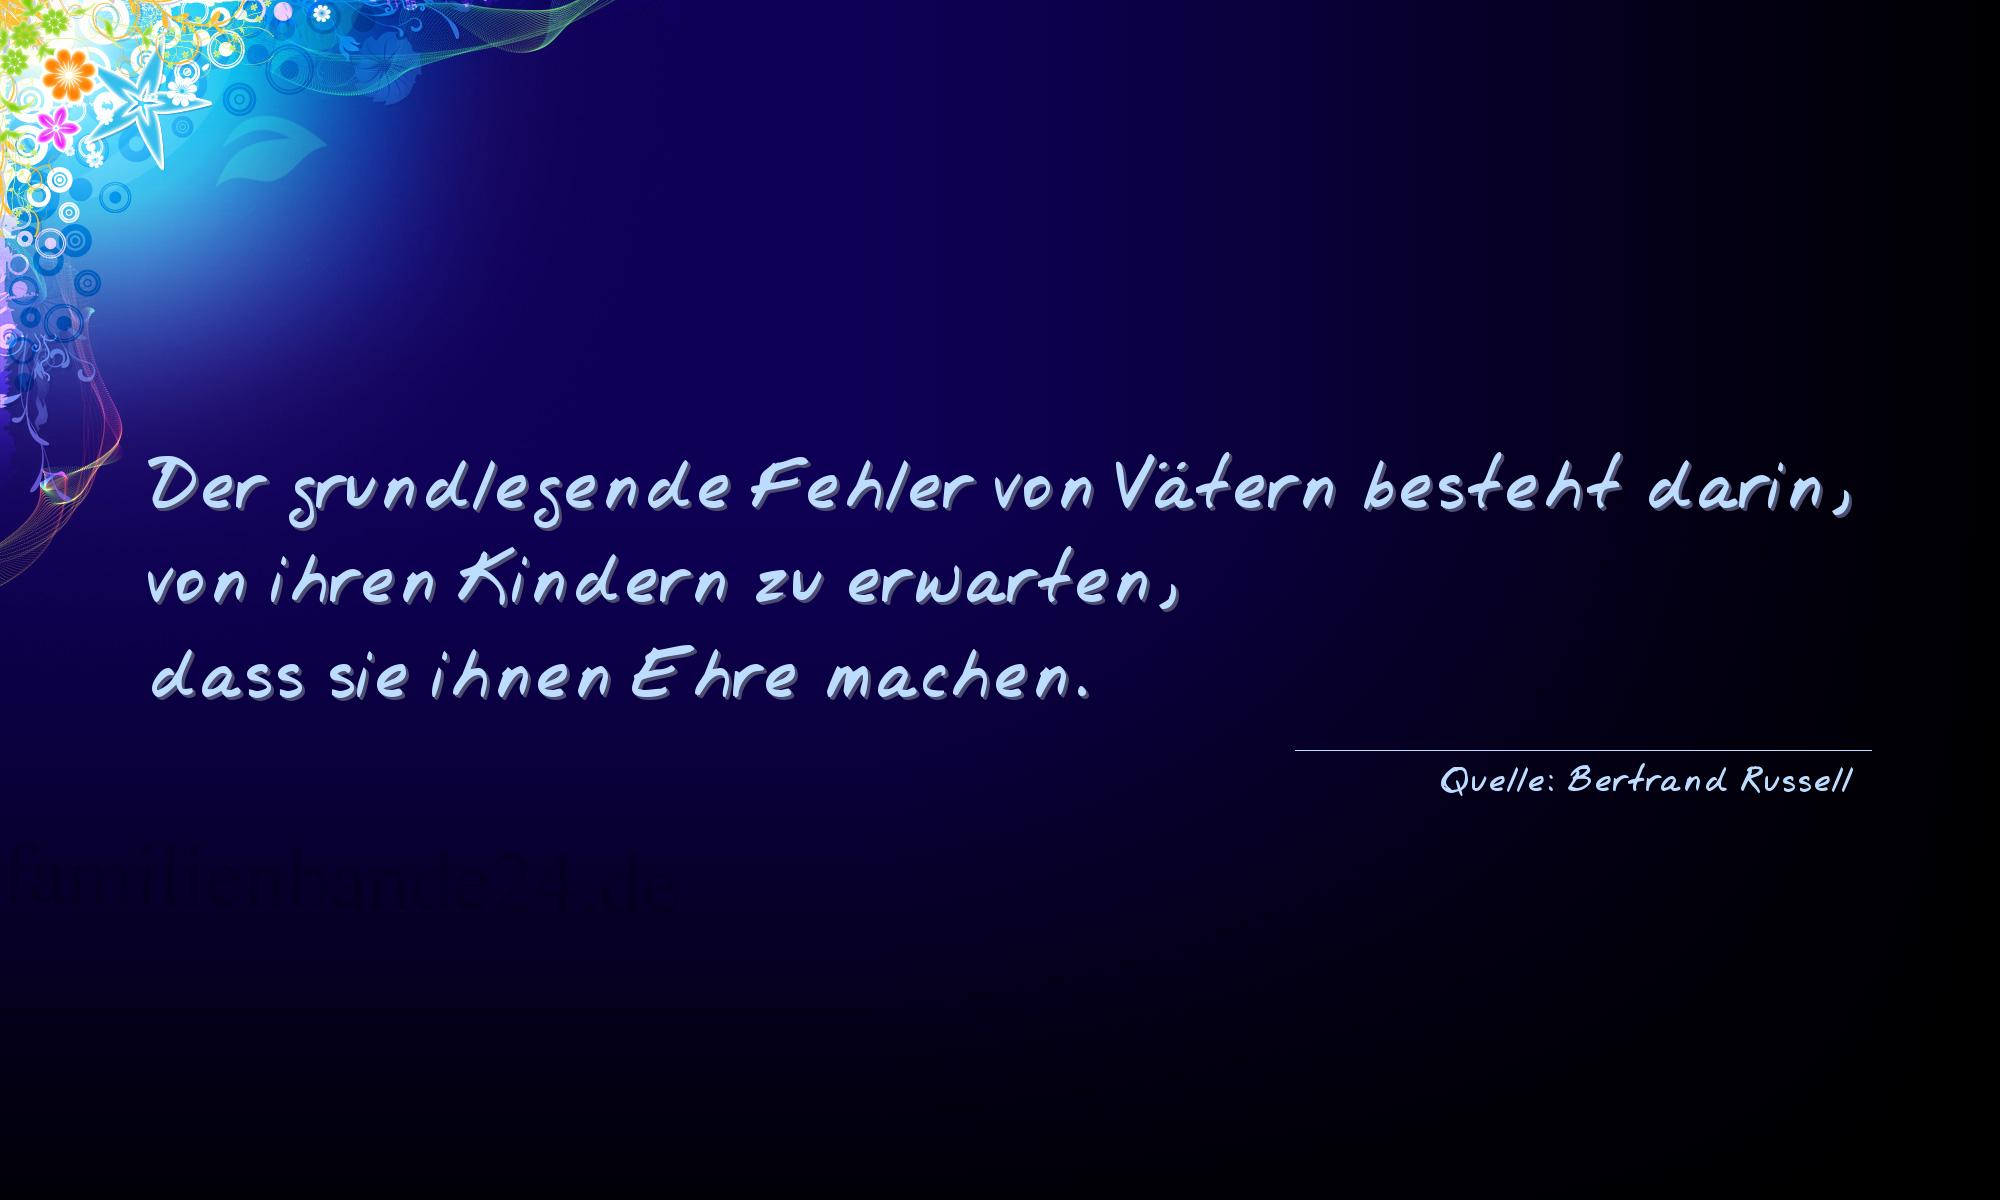 Familienspruch Nr. 349, Quelle Bertrand Russell